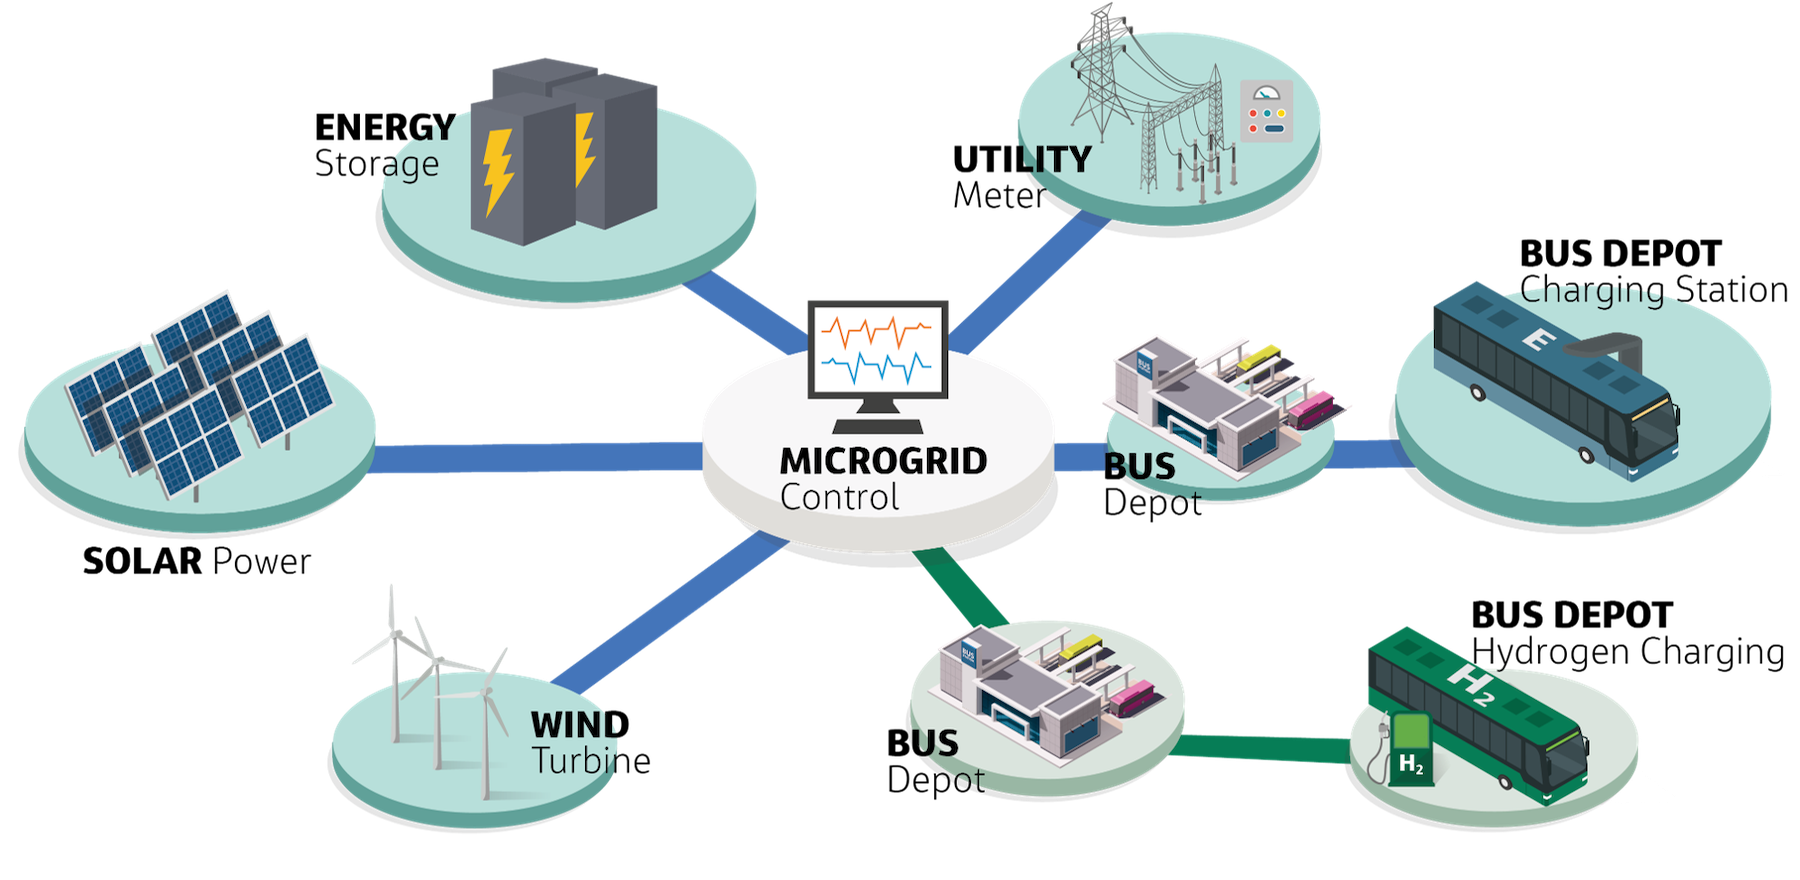 Microgrids can draw power from a variety of sources. Image: Courtesy of Jacobs Engineering